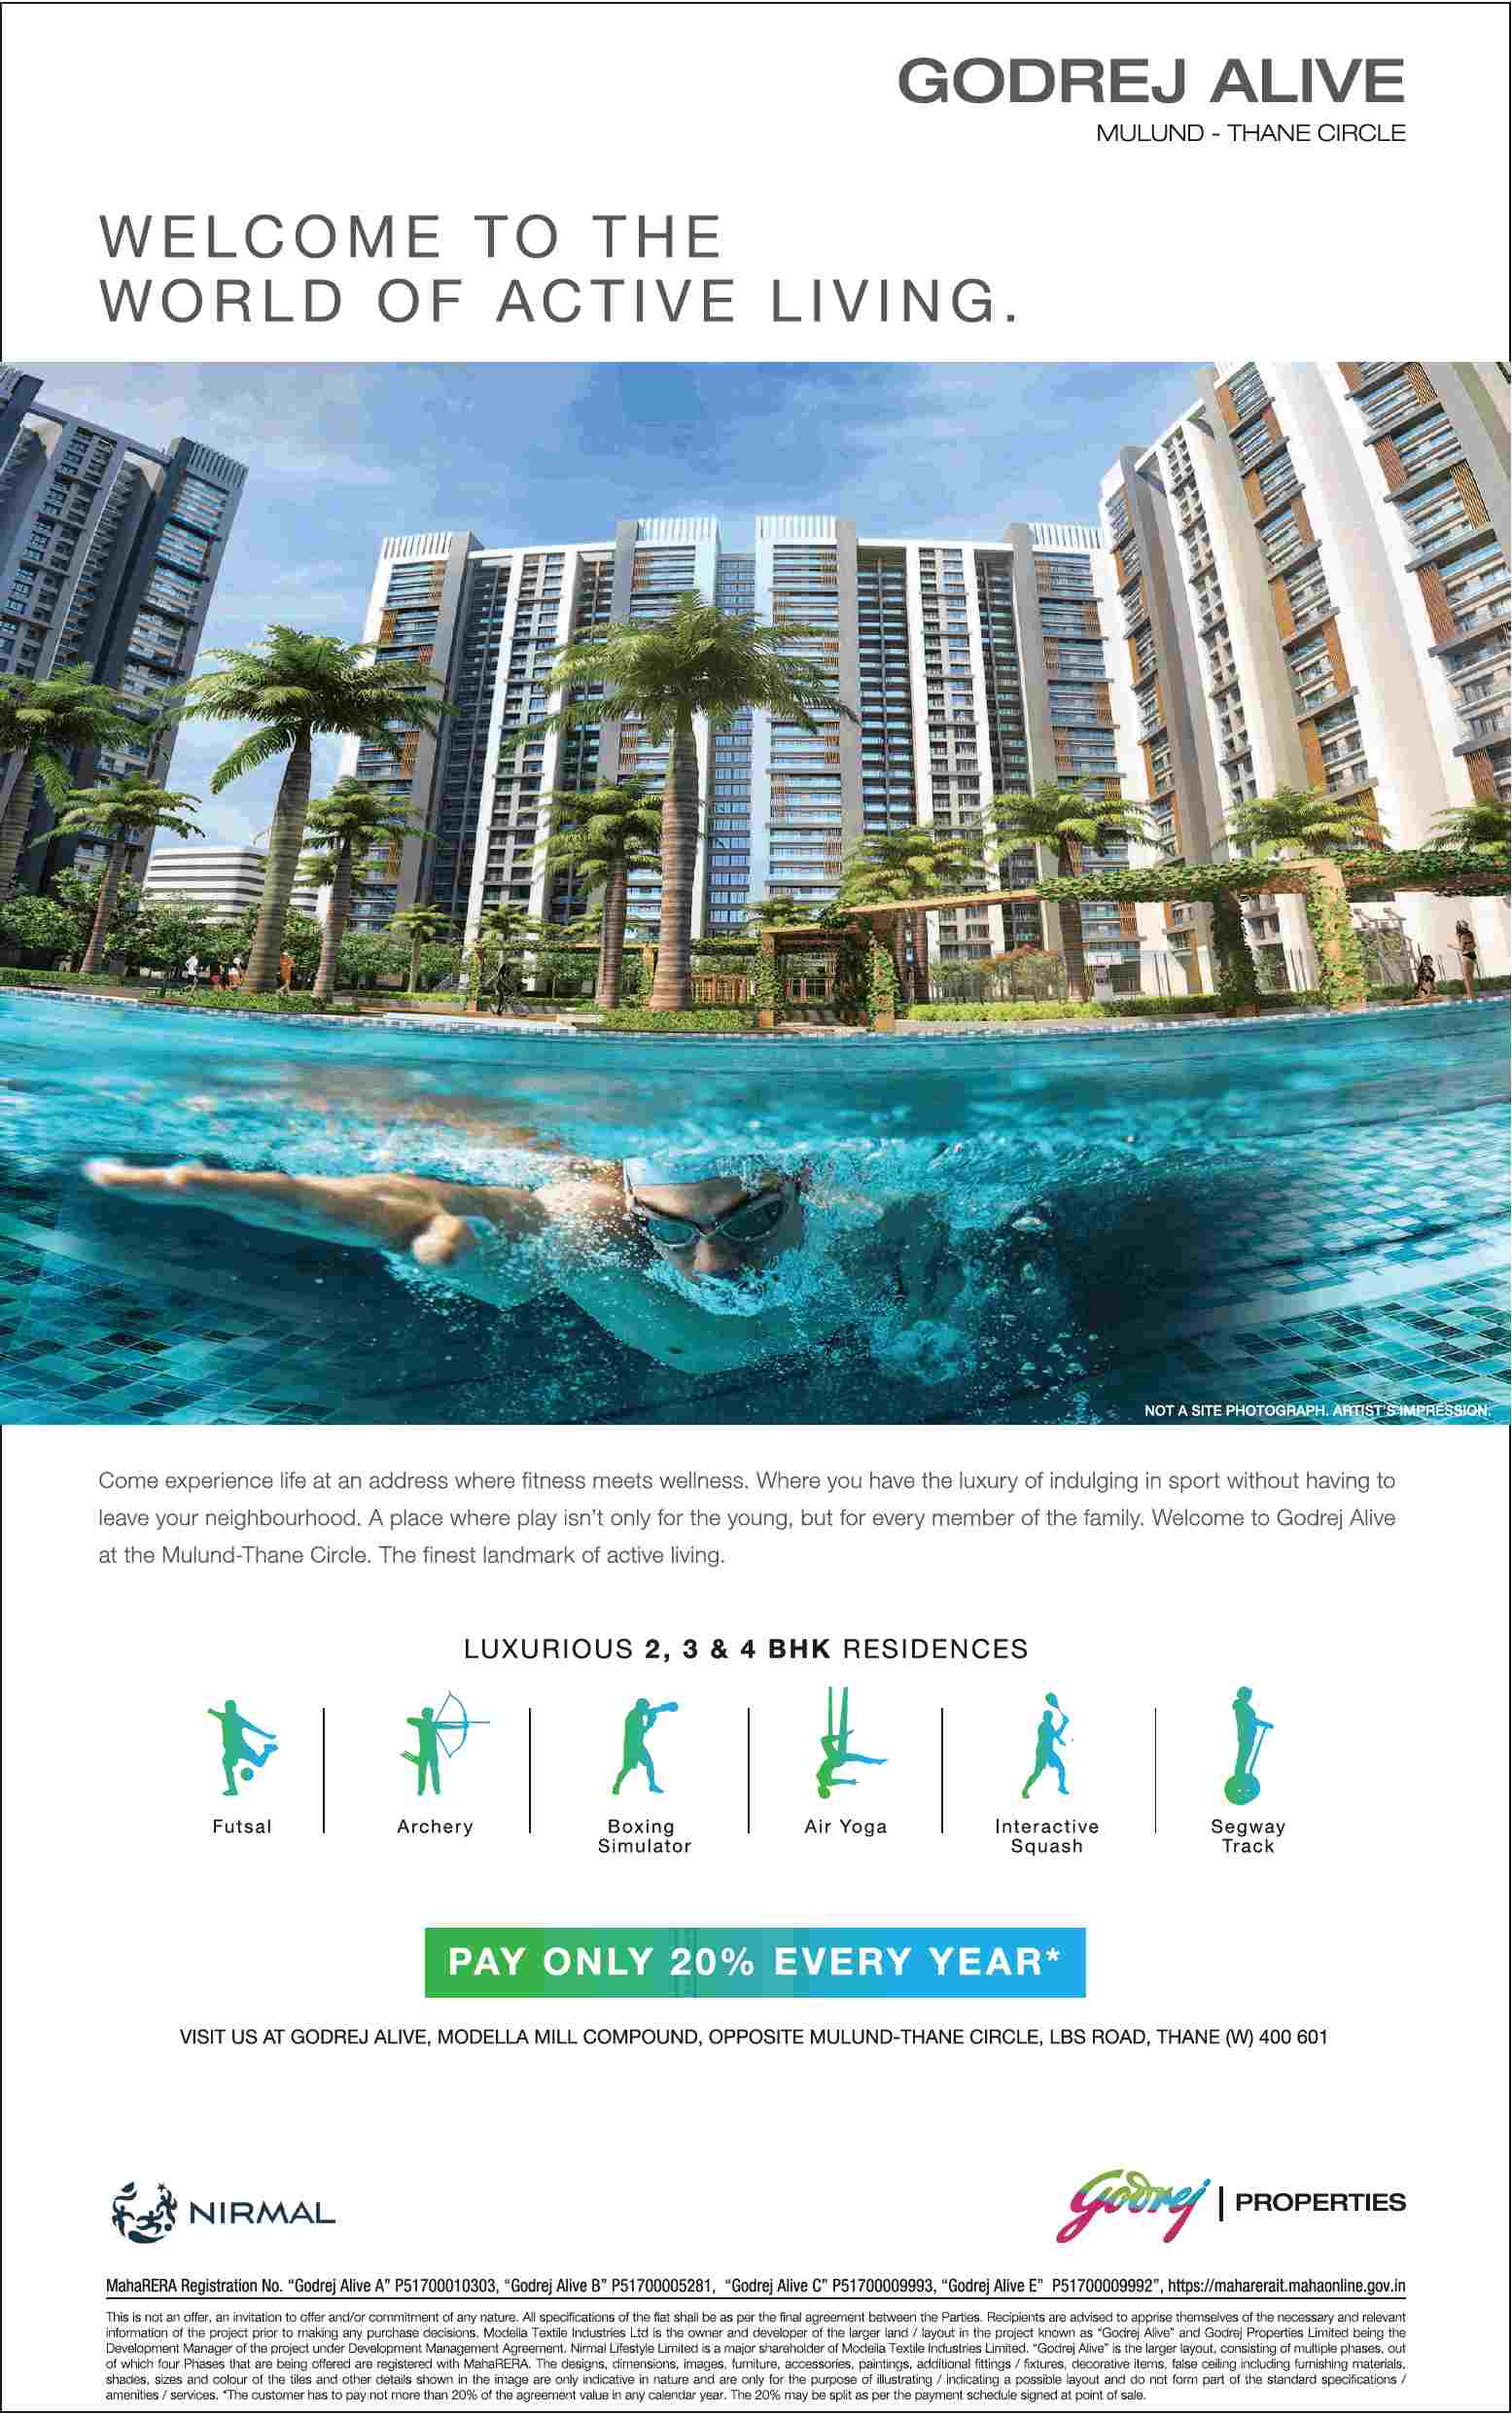 Book home & pay only 20% every year at Godrej Alive in Mumbai